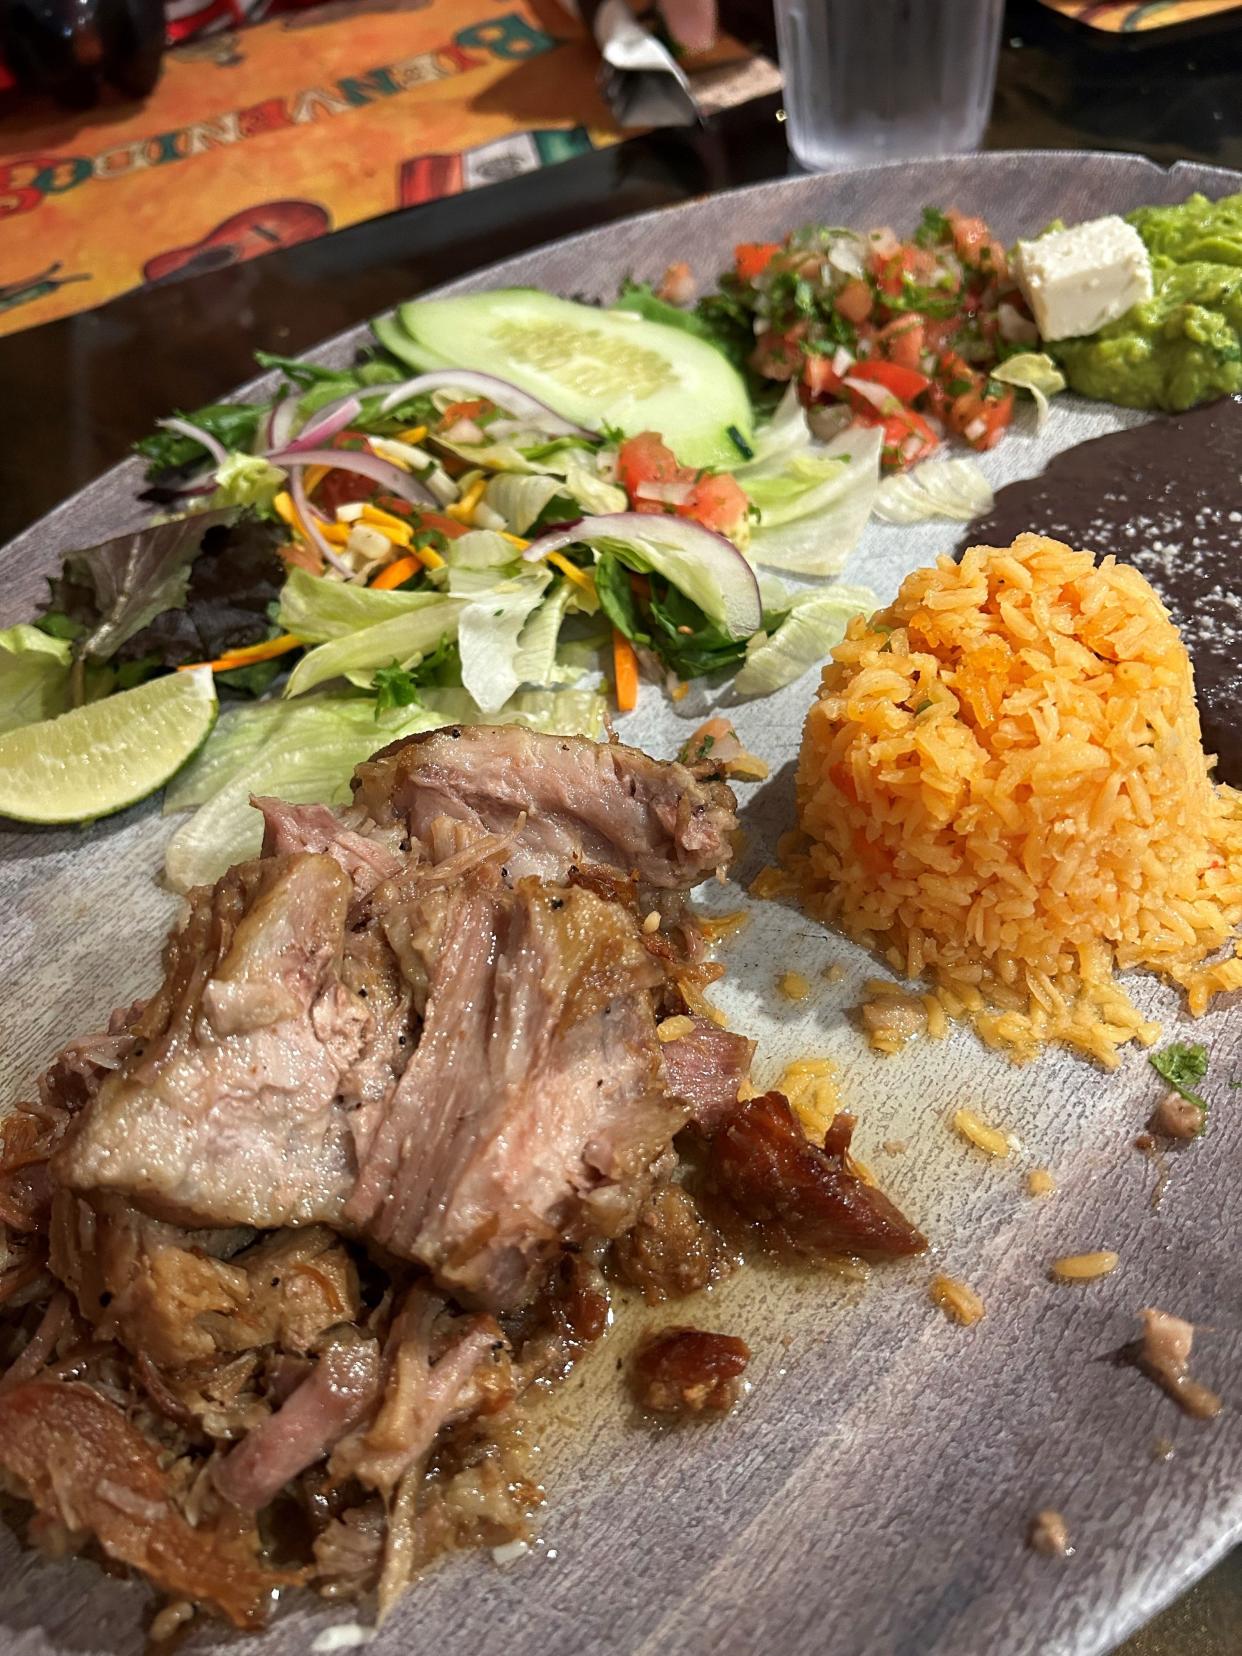 A carnitas platter at La Cabañita in the Manahawkin section of Stafford.